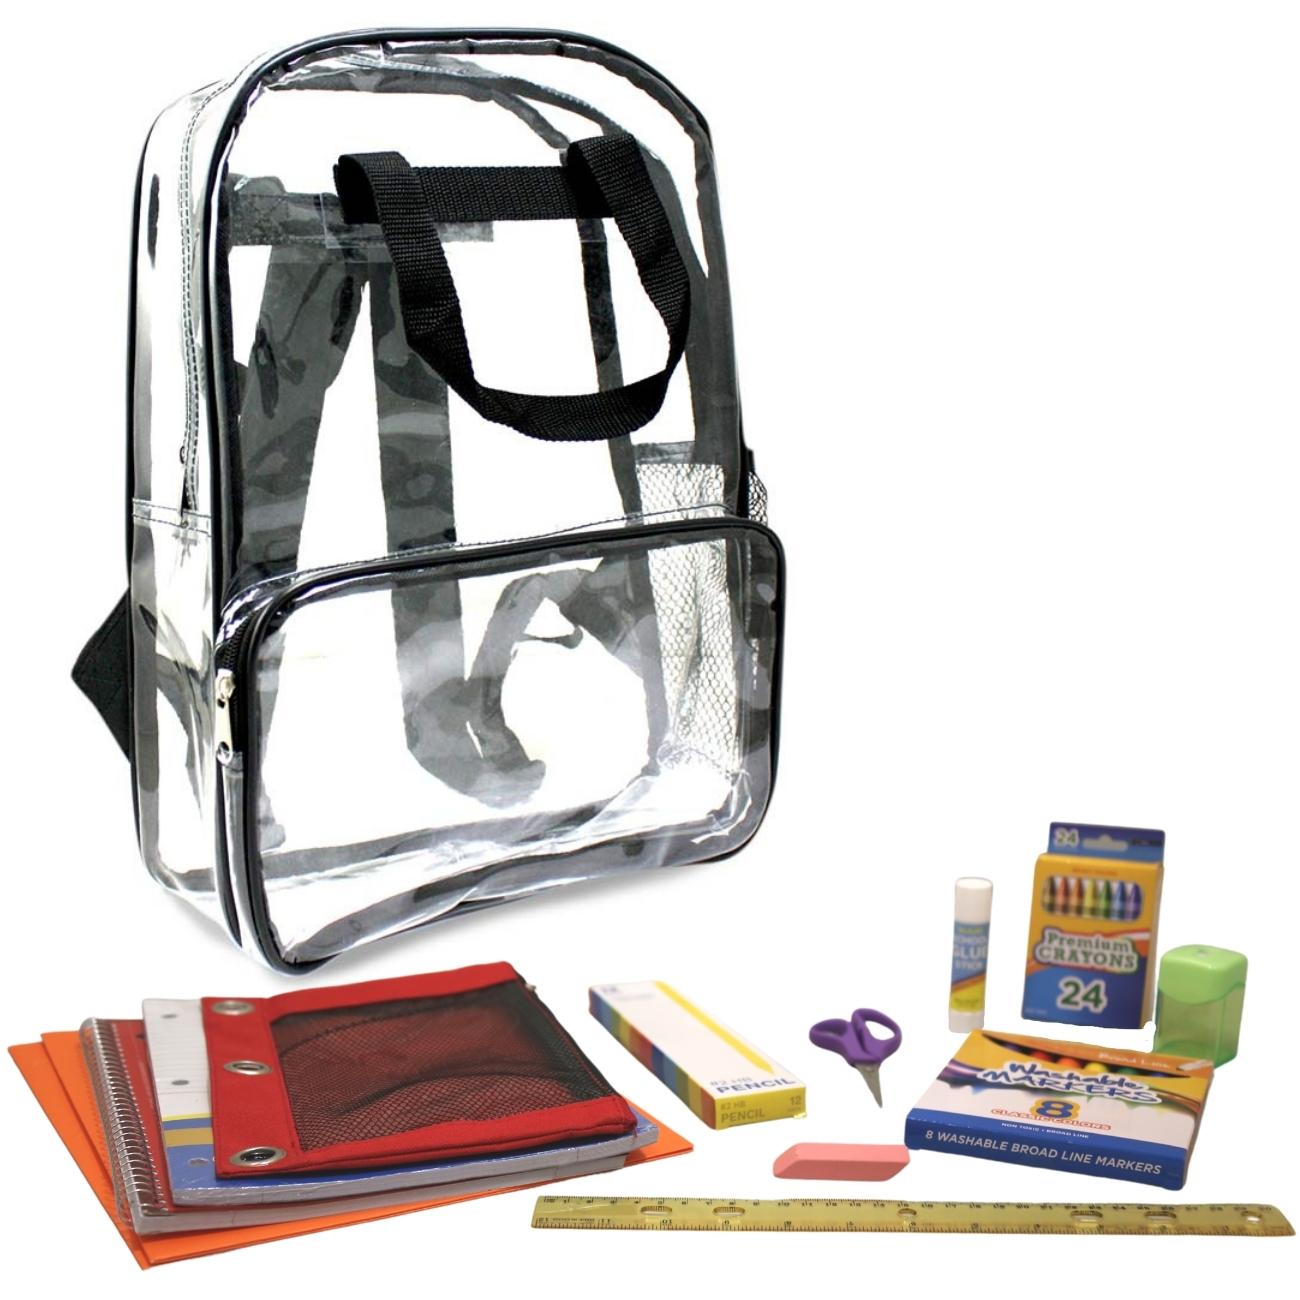 Wholesale 1st-5th Deluxe Student Kit (54 Items per Kit) in 18